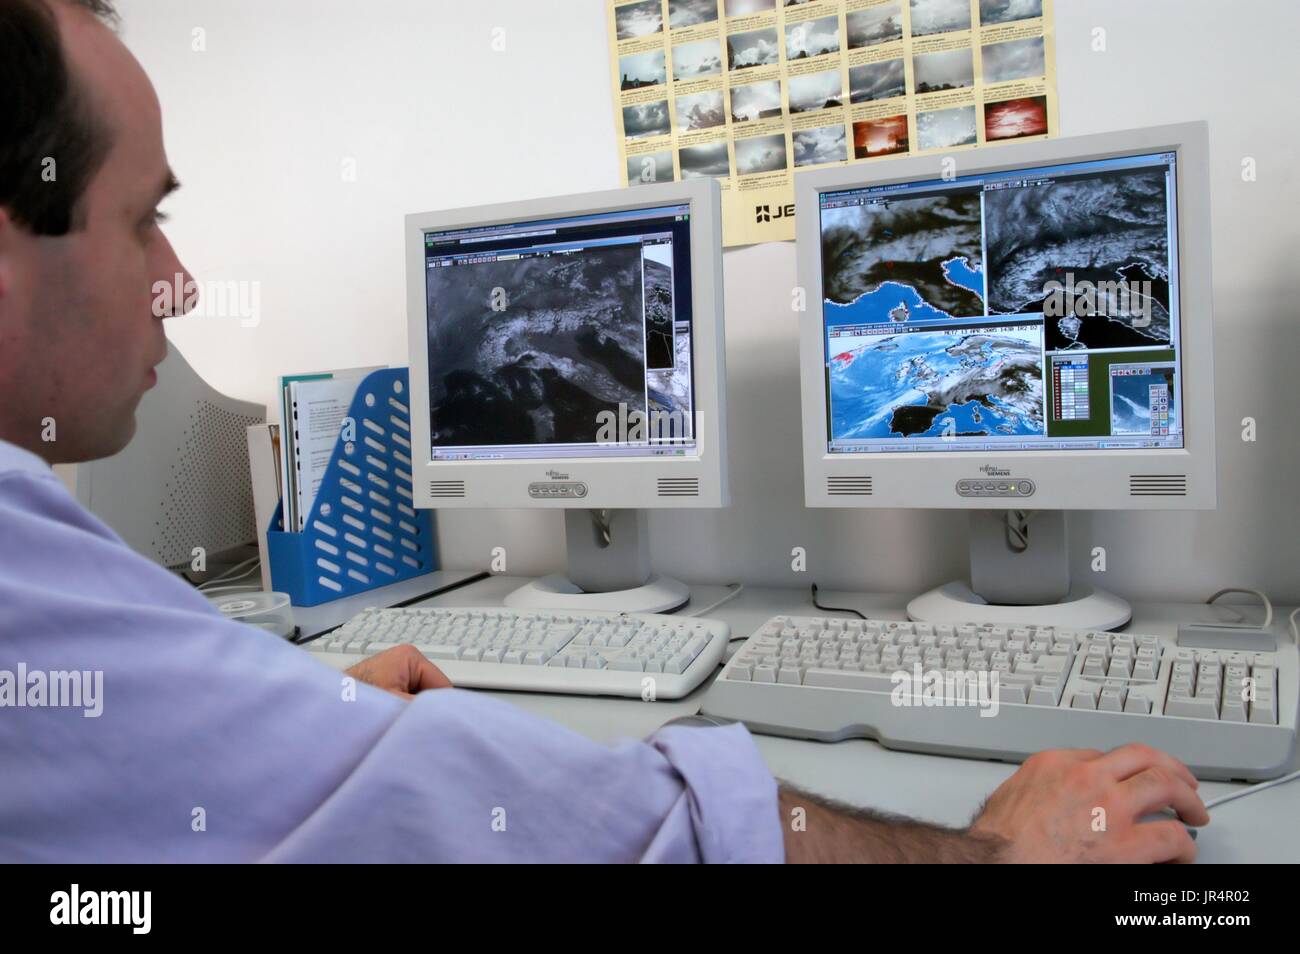 Milan (Lombardy, Italy), ARPA, Regional Agency for Environmental Protection, operational meteorological room Stock Photo